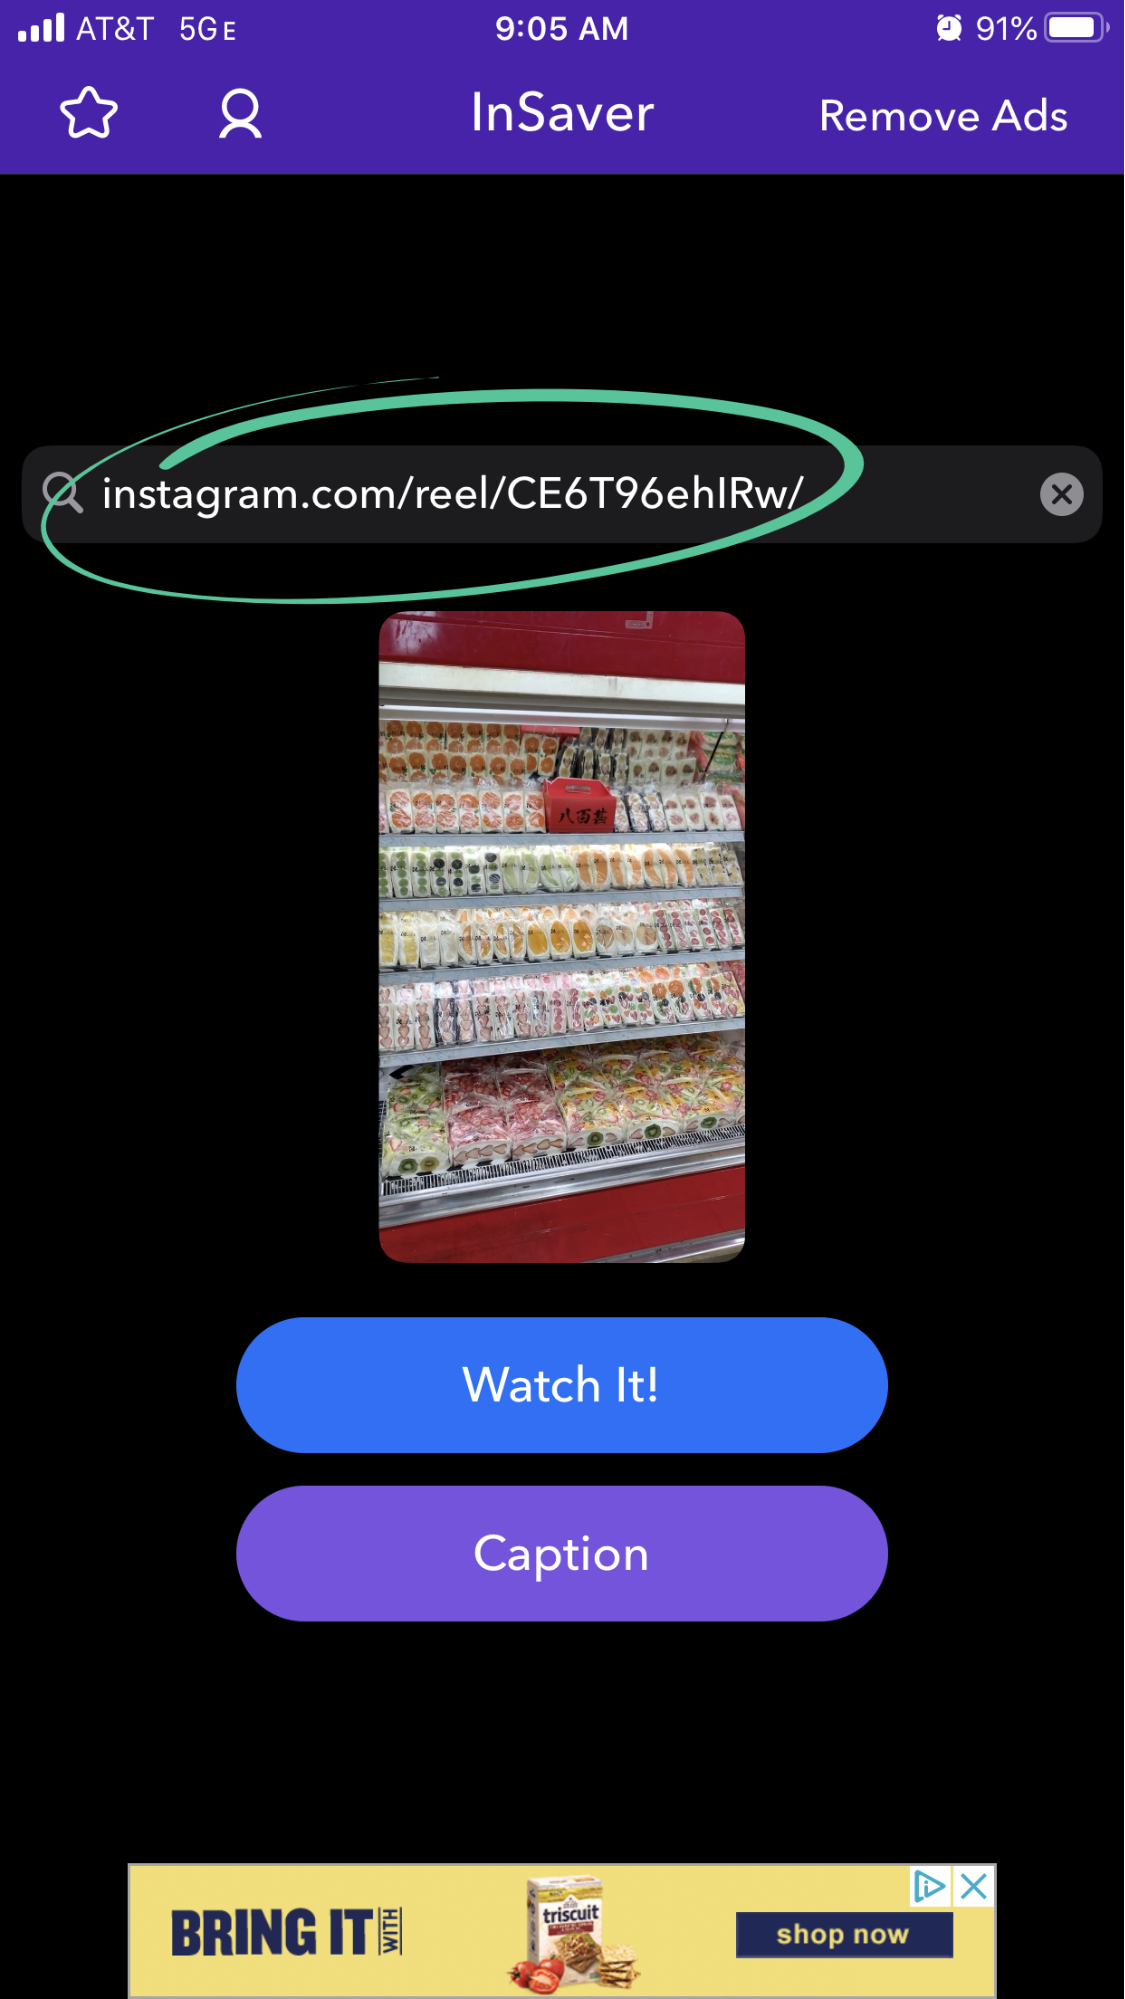 How to Download Instagram Reels: A Step-by-Step Guide